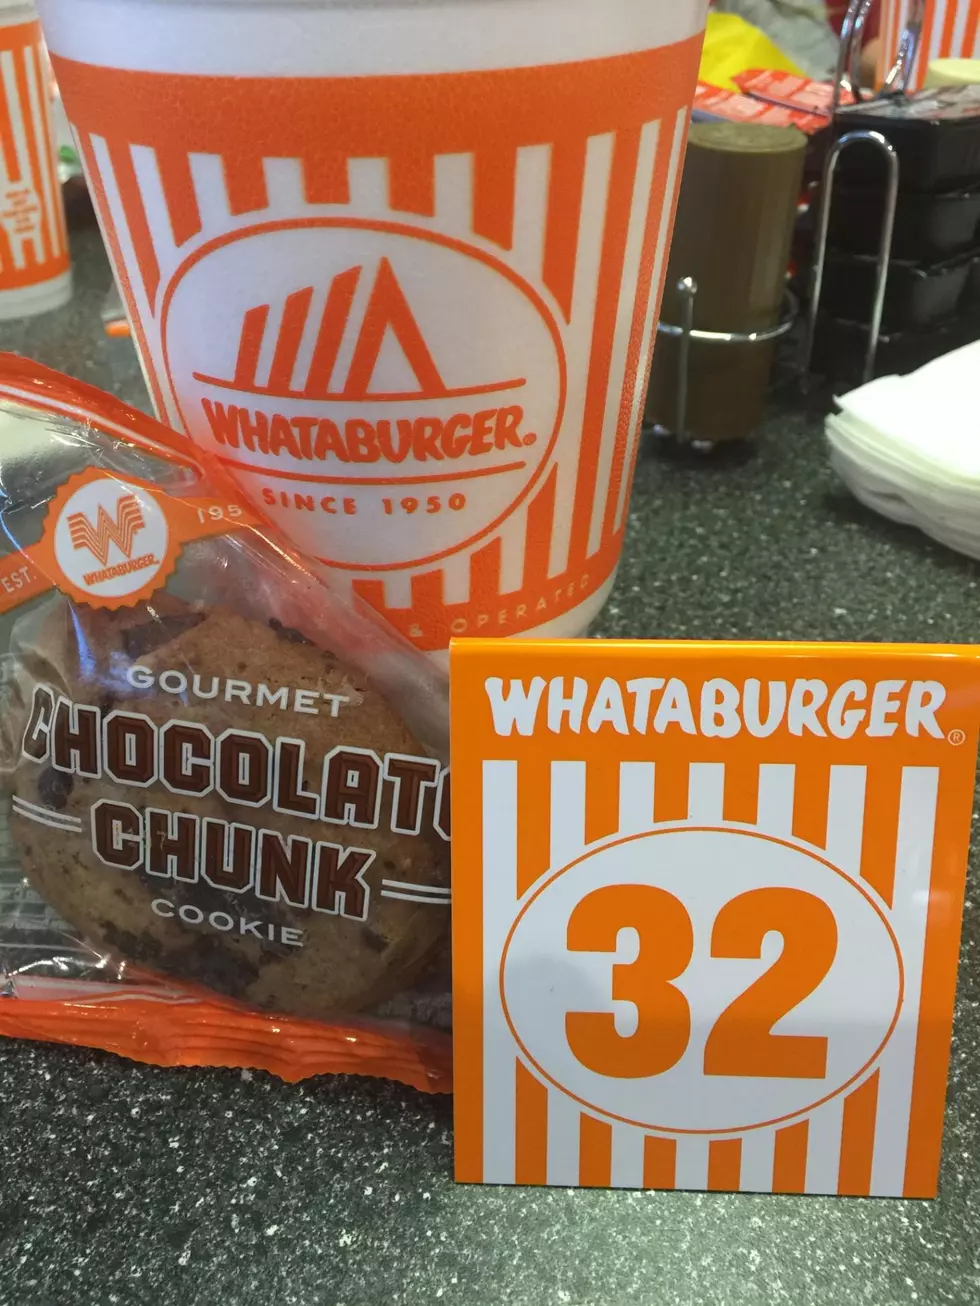 Report: Whataburger is Exploring Options for a Possible Sale